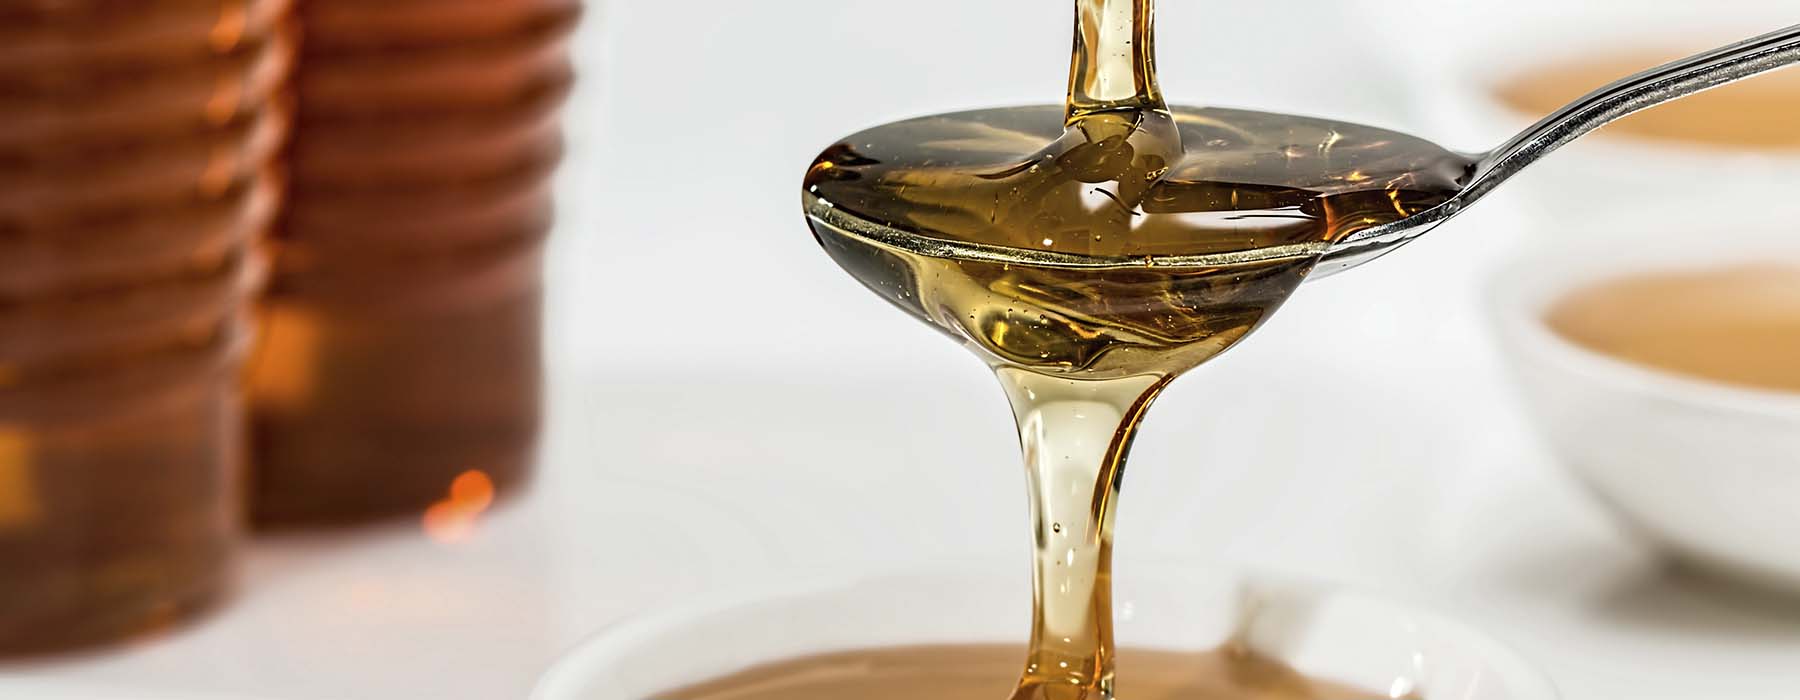 EspressoWorks Blog - 8 Sugar Alternatives for Coffee You Didn’t Know Existed - Maple Syrup